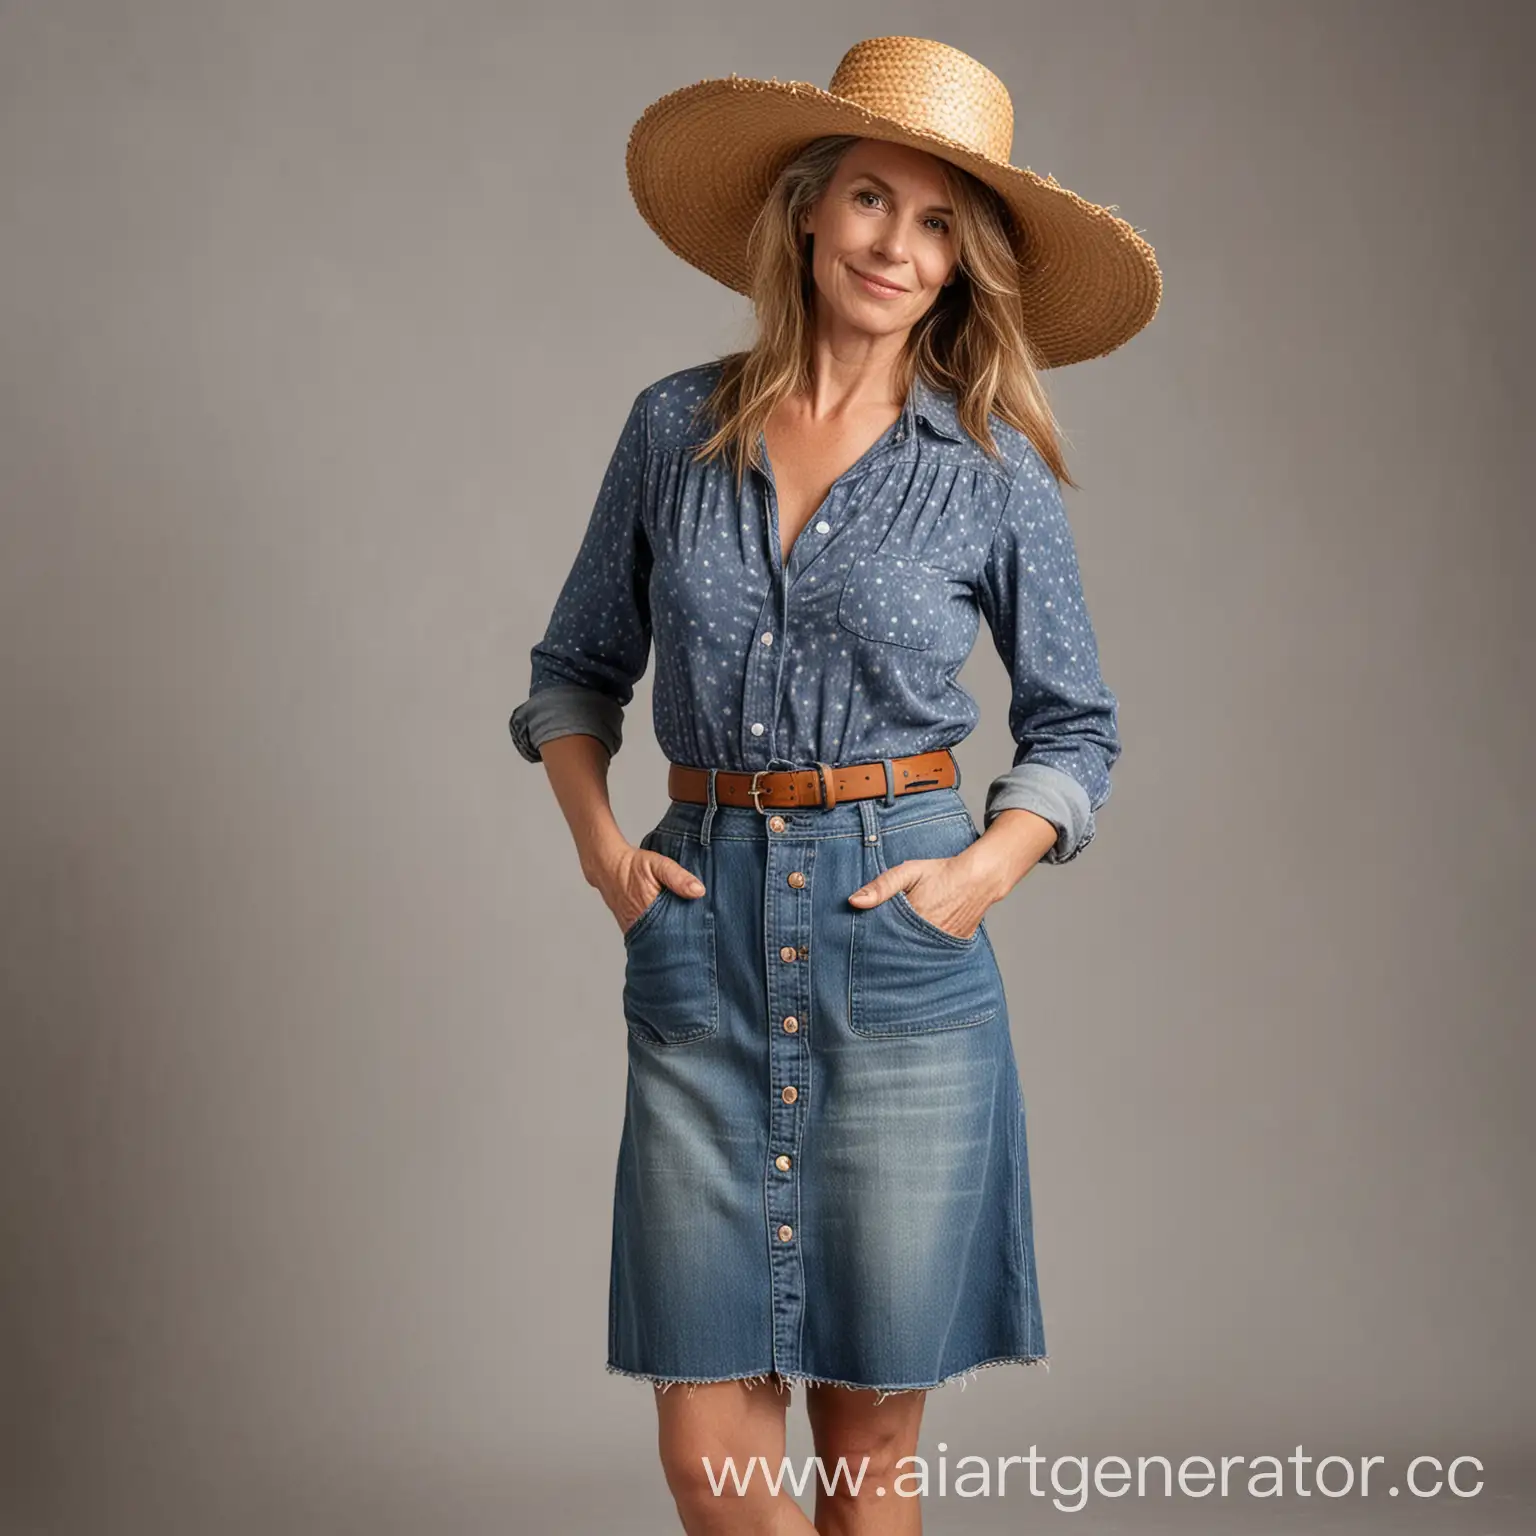 Elegant-55YearOld-Woman-in-FullLength-Portrait-with-Straw-Hat